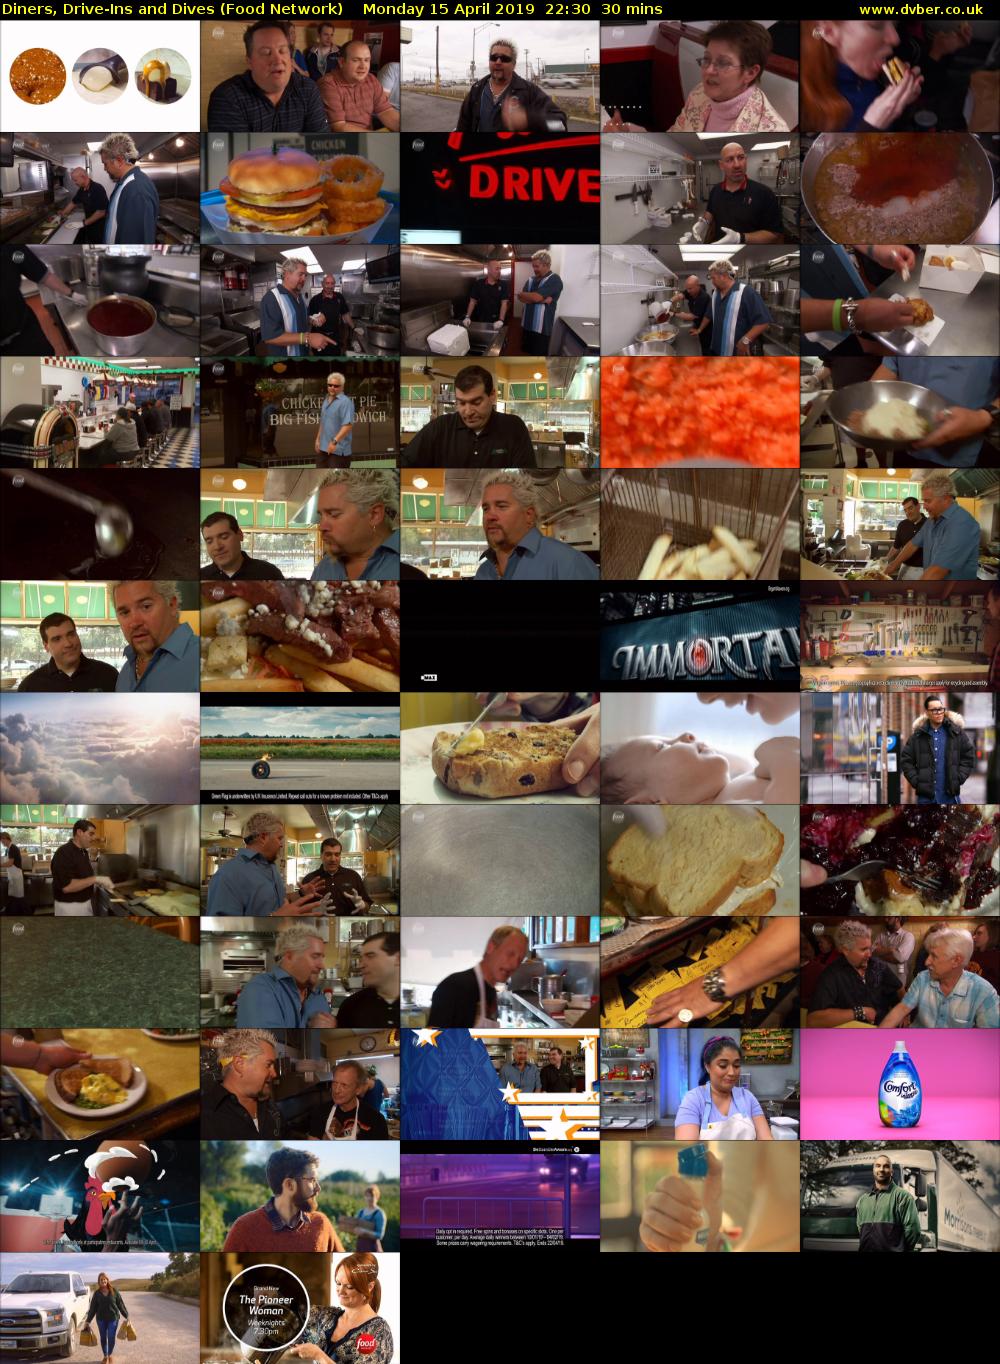 Diners, Drive-Ins And Dives (Food Network) Monday 15 April 2019 22:30 - 23:00